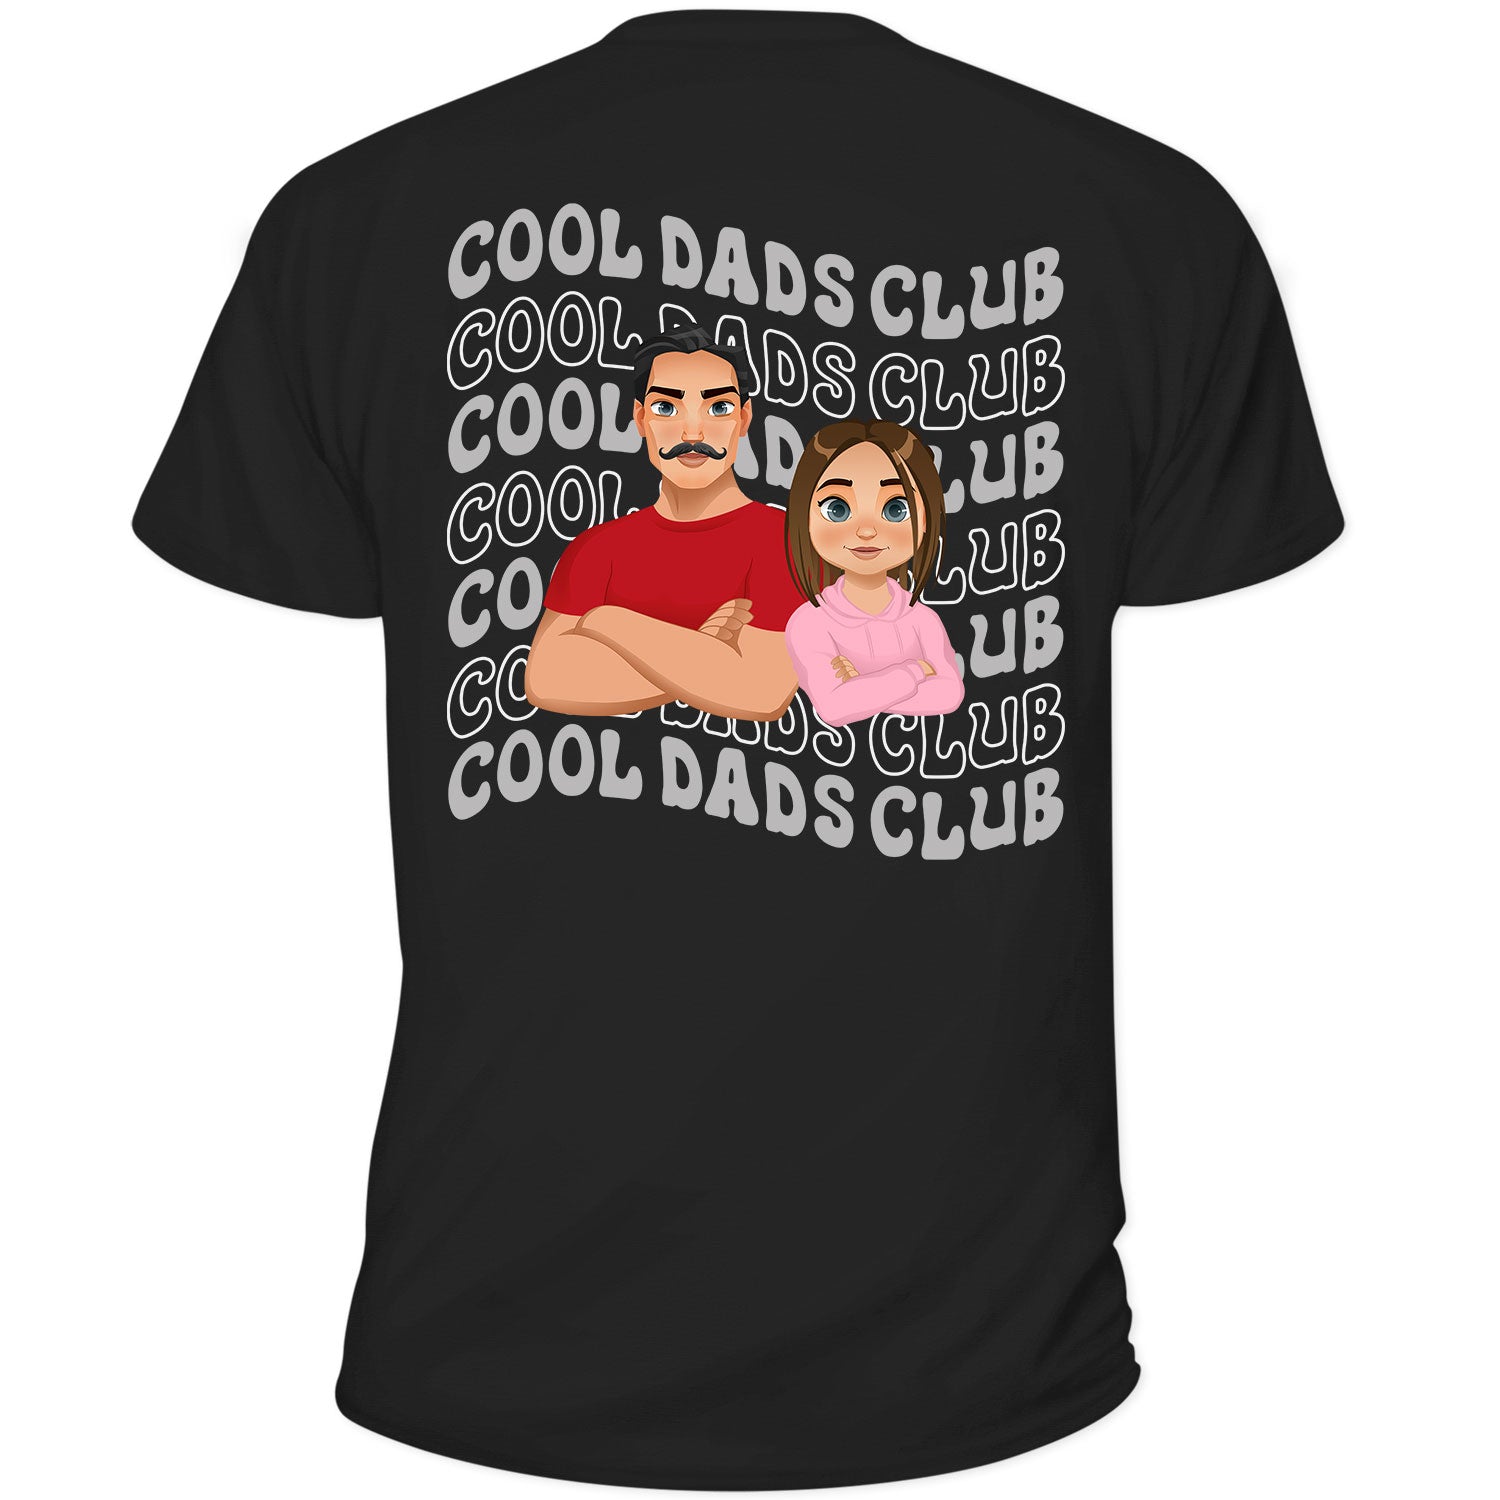 Flat Art Cool Dads Club - Gift For Father - Personalized T Shirt